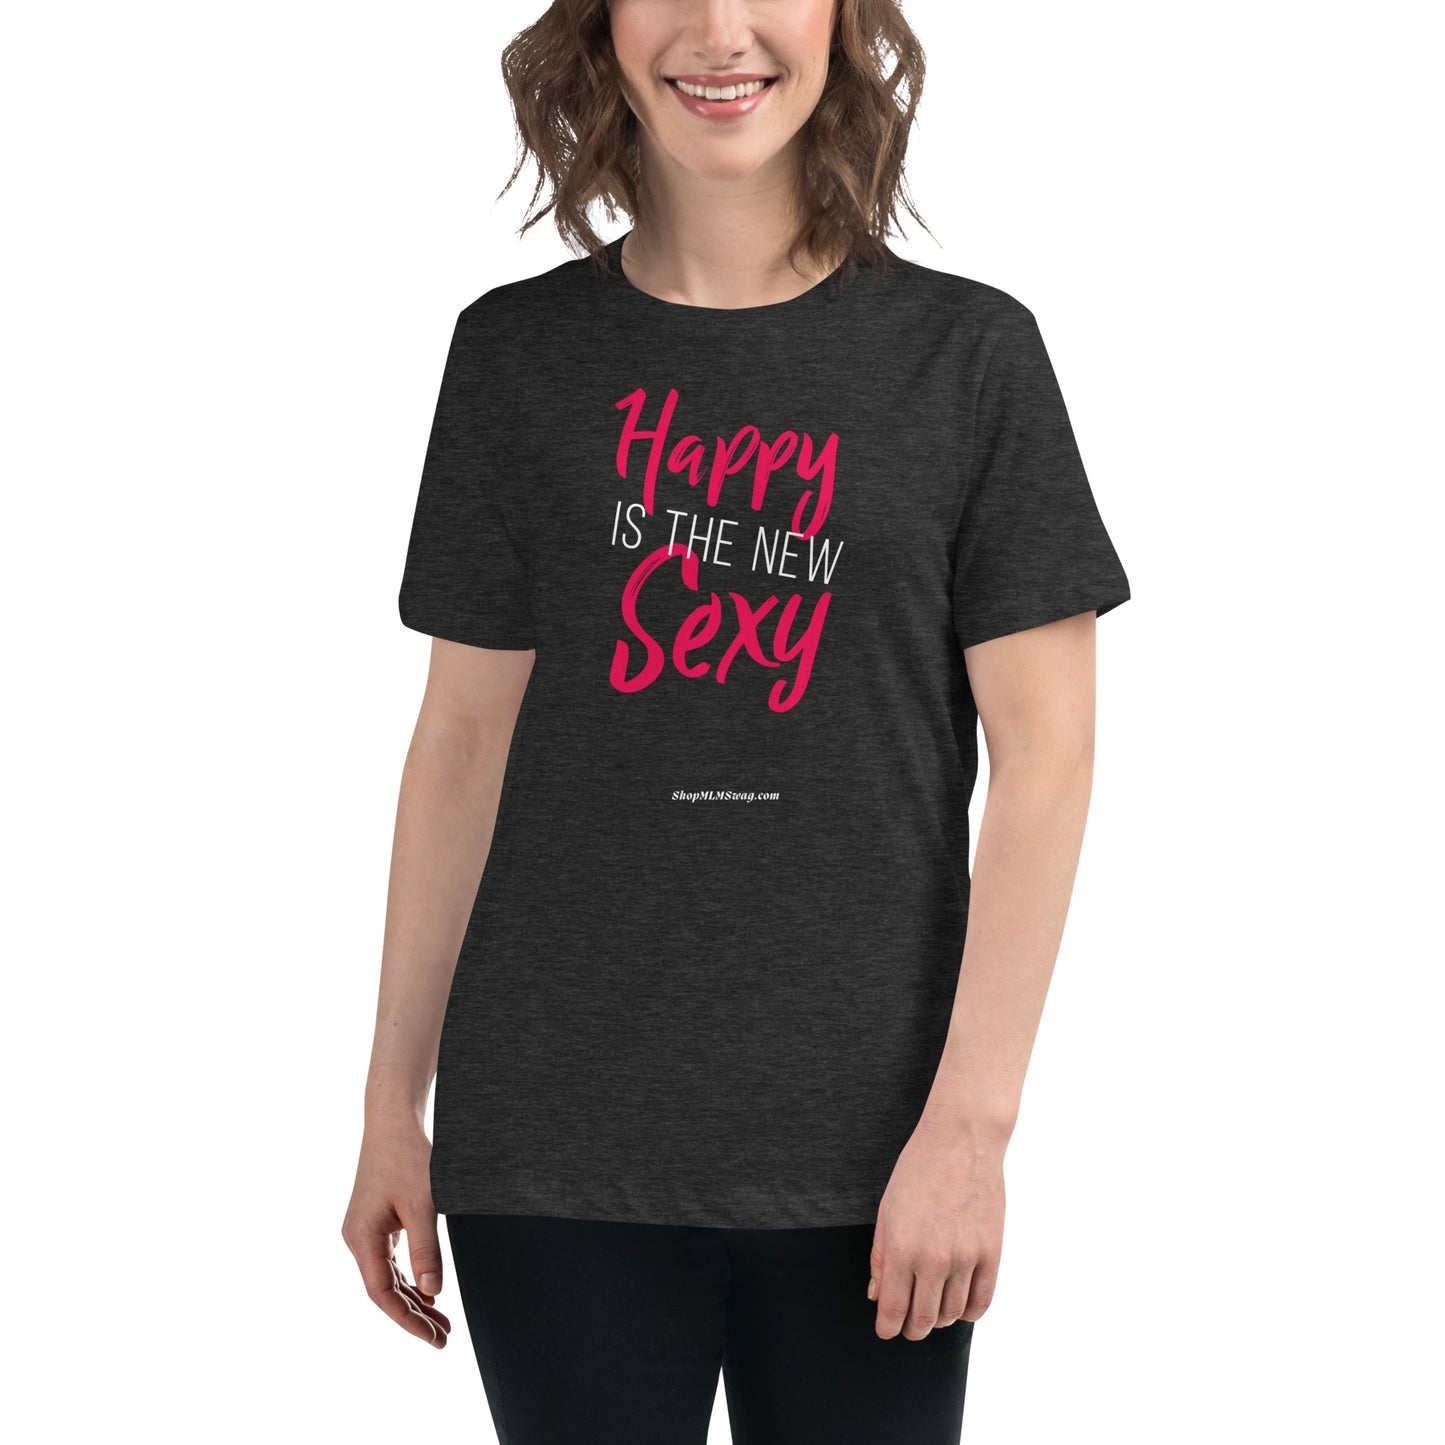 "Happy Is The New Sexy" Sassy T-Shirt